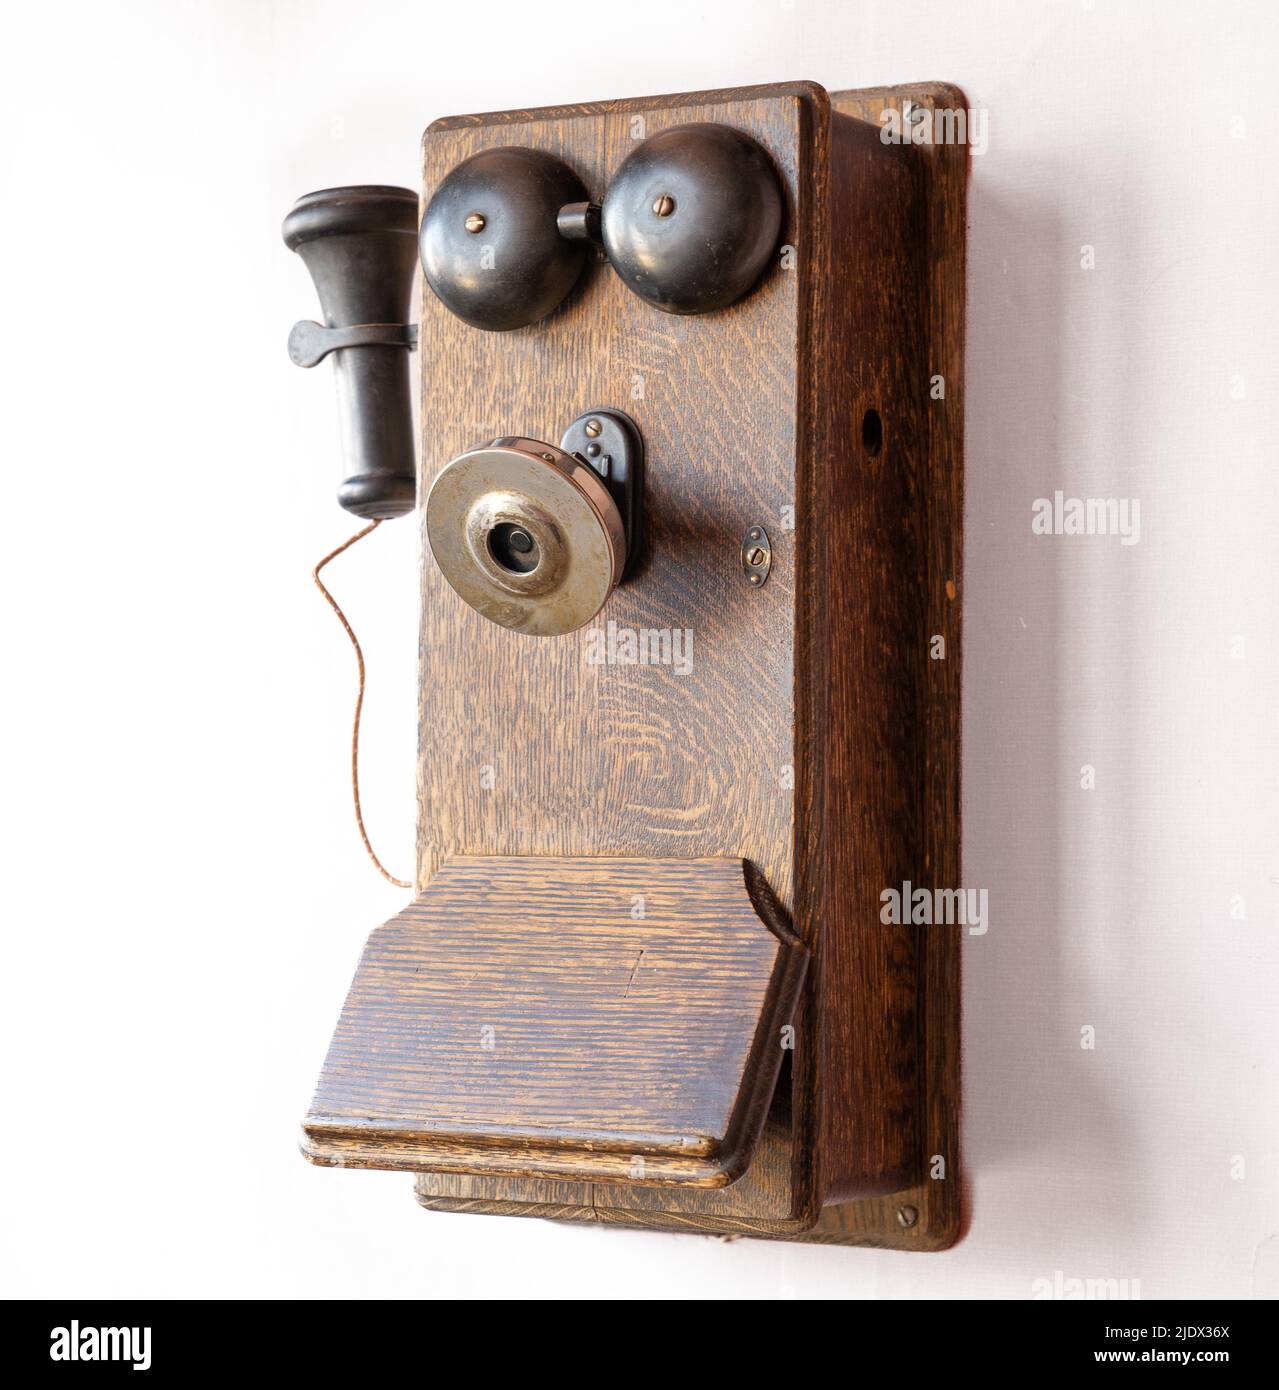 Old antique obsolete wooden wall mounted telephone Stock Photo